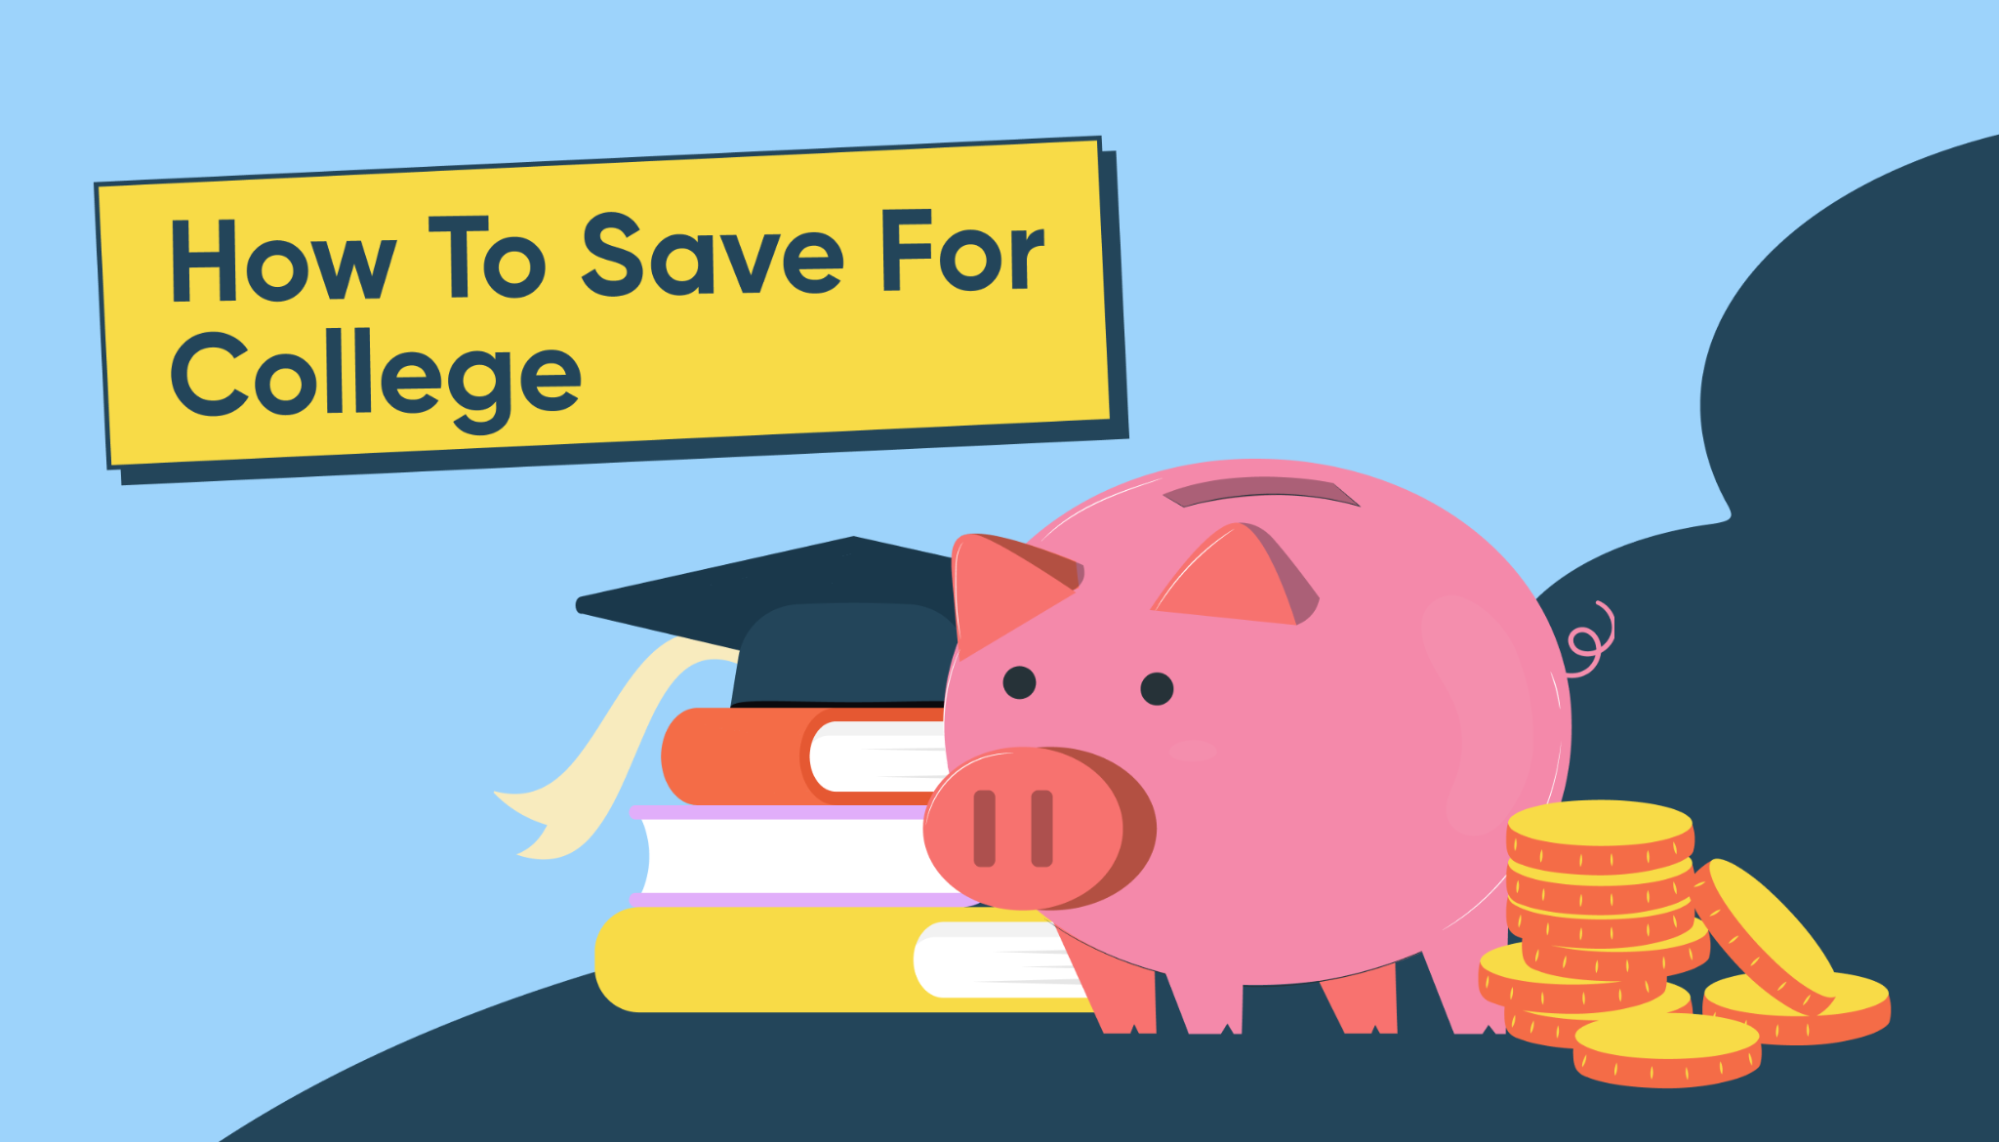 Strategies to save for college